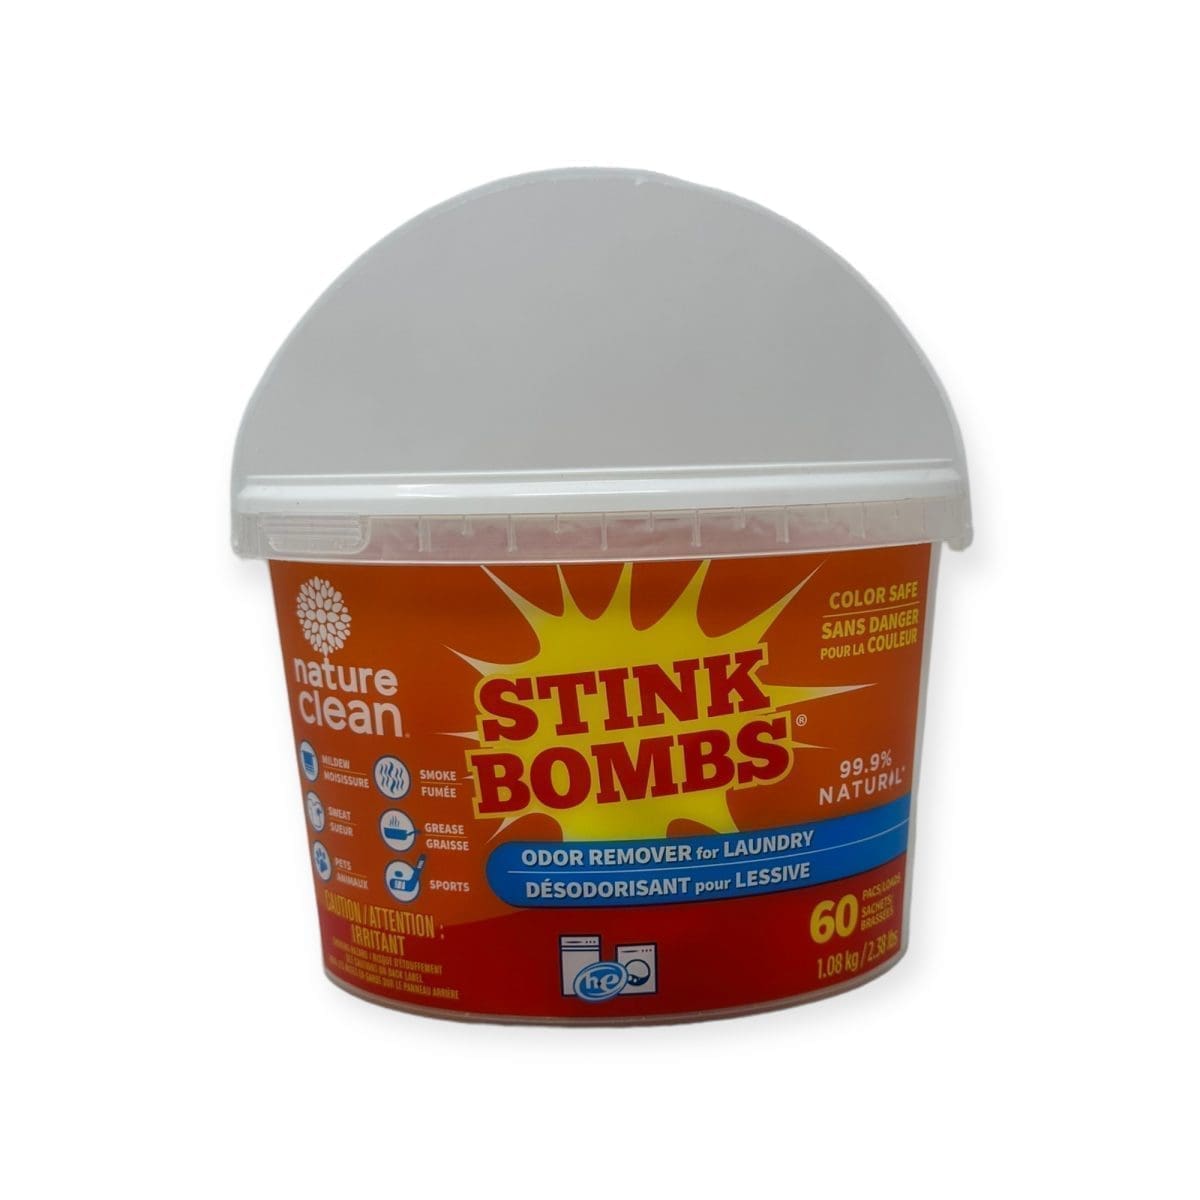 Nature Clean Stink Bombs Odor Remover for Laundry (1.08Kg)